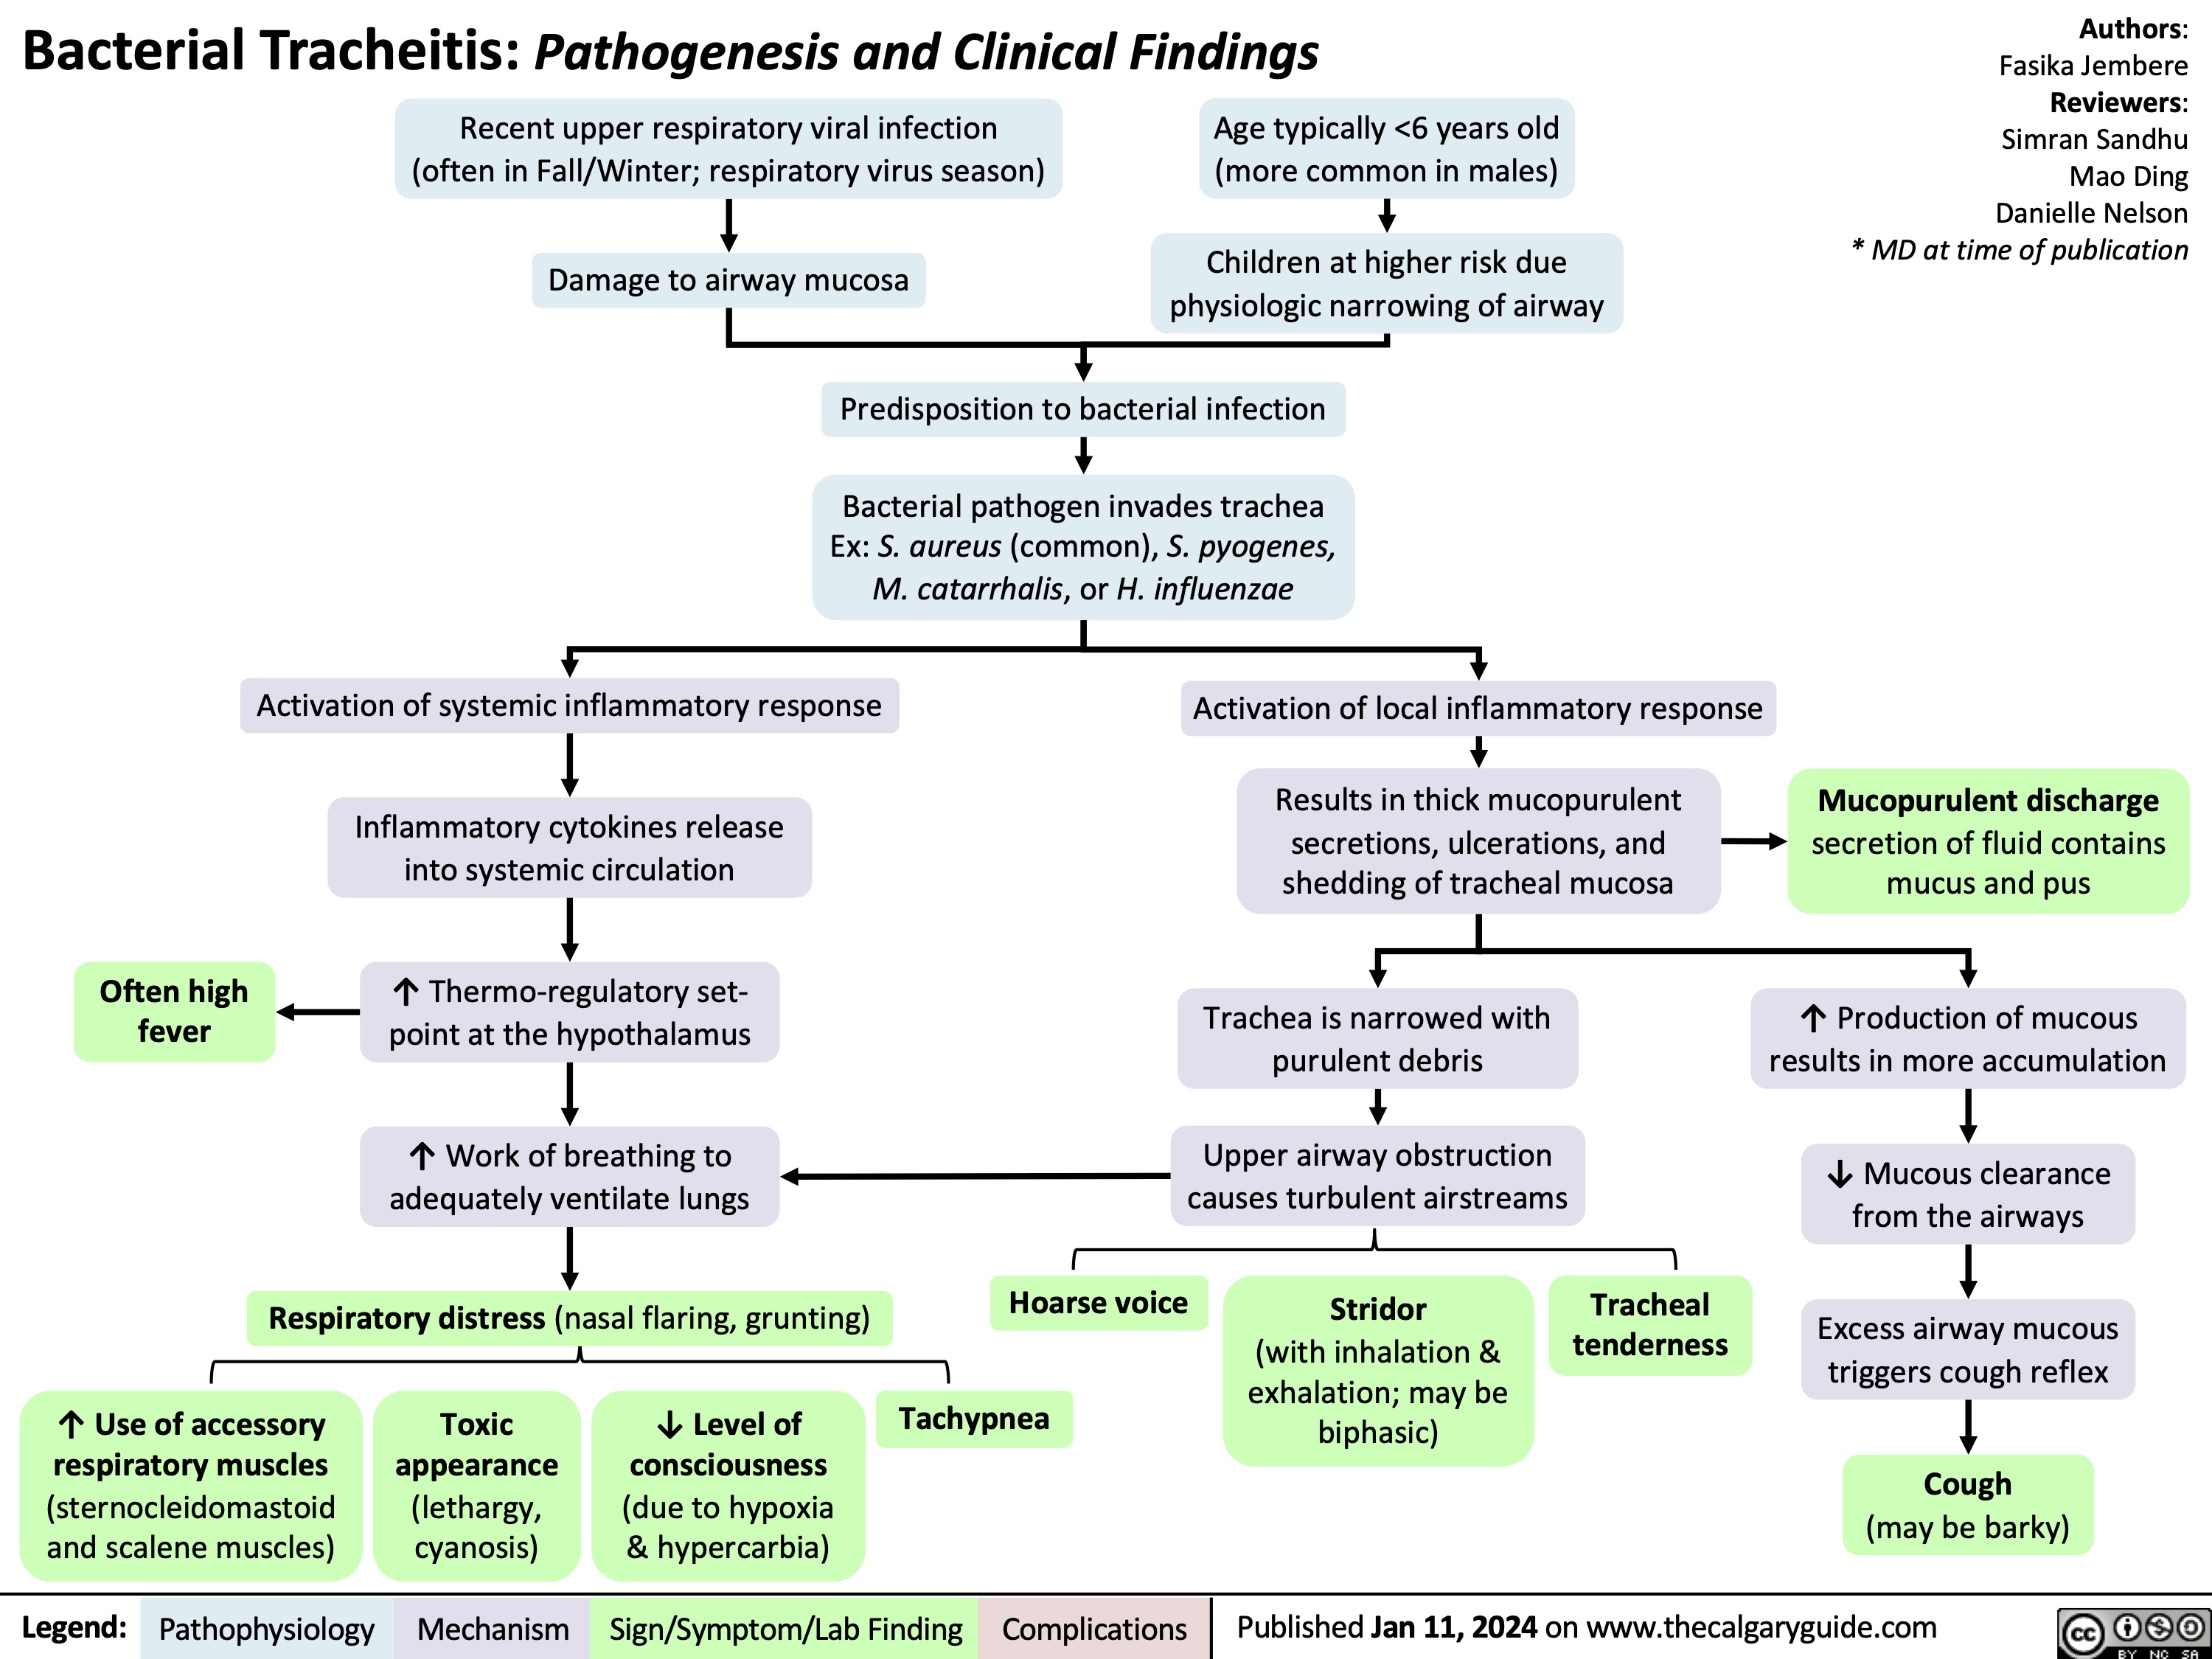 Bacterial Tracheitis: Pathogenesis and Clinical Findings
Authors: Fasika Jembere Reviewers: Simran Sandhu Mao Ding Danielle Nelson * MD at time of publication
  Recent upper respiratory viral infection
Age typically <6 years old (more common in males)
Children at higher risk due physiologic narrowing of airway
 Recent upper respiratory viral infection
(often in Fall/Winter; respiratory virus season) Damage to airway mucosa
    Activation of systemic inflammatory response
Inflammatory cytokines release into systemic circulation
↑ Thermo-regulatory set- point at the hypothalamus
↑ Work of breathing to adequately ventilate lungs
Respiratory distress (nasal flaring, grunting)
Activation of local inflammatory response
Results in thick mucopurulent secretions, ulcerations, and shedding of tracheal mucosa
Mucopurulent discharge
secretion of fluid contains mucus and pus
↑ Production of mucous results in more accumulation
Predisposition to bacterial infection
Bacterial pathogen invades trachea Ex: S. aureus (common), S. pyogenes, M. catarrhalis, or H. influenzae
          Often high fever
Trachea is narrowed with purulent debris
Upper airway obstruction causes turbulent airstreams
          Hoarse voice Tachypnea
Stridor
(with inhalation & exhalation; may be biphasic)
Tracheal tenderness
↓ Mucous clearance from the airways
Excess airway mucous triggers cough reflex
Cough
(may be barky)
      ↑ Use of accessory
respiratory muscles
(sternocleidomastoid and scalene muscles)
Toxic appearance (lethargy, cyanosis)
↓ Level of consciousness (due to hypoxia & hypercarbia)
  Legend:
 Pathophysiology
Mechanism
Sign/Symptom/Lab Finding
 Complications
Published Jan 11, 2024 on www.thecalgaryguide.com
    